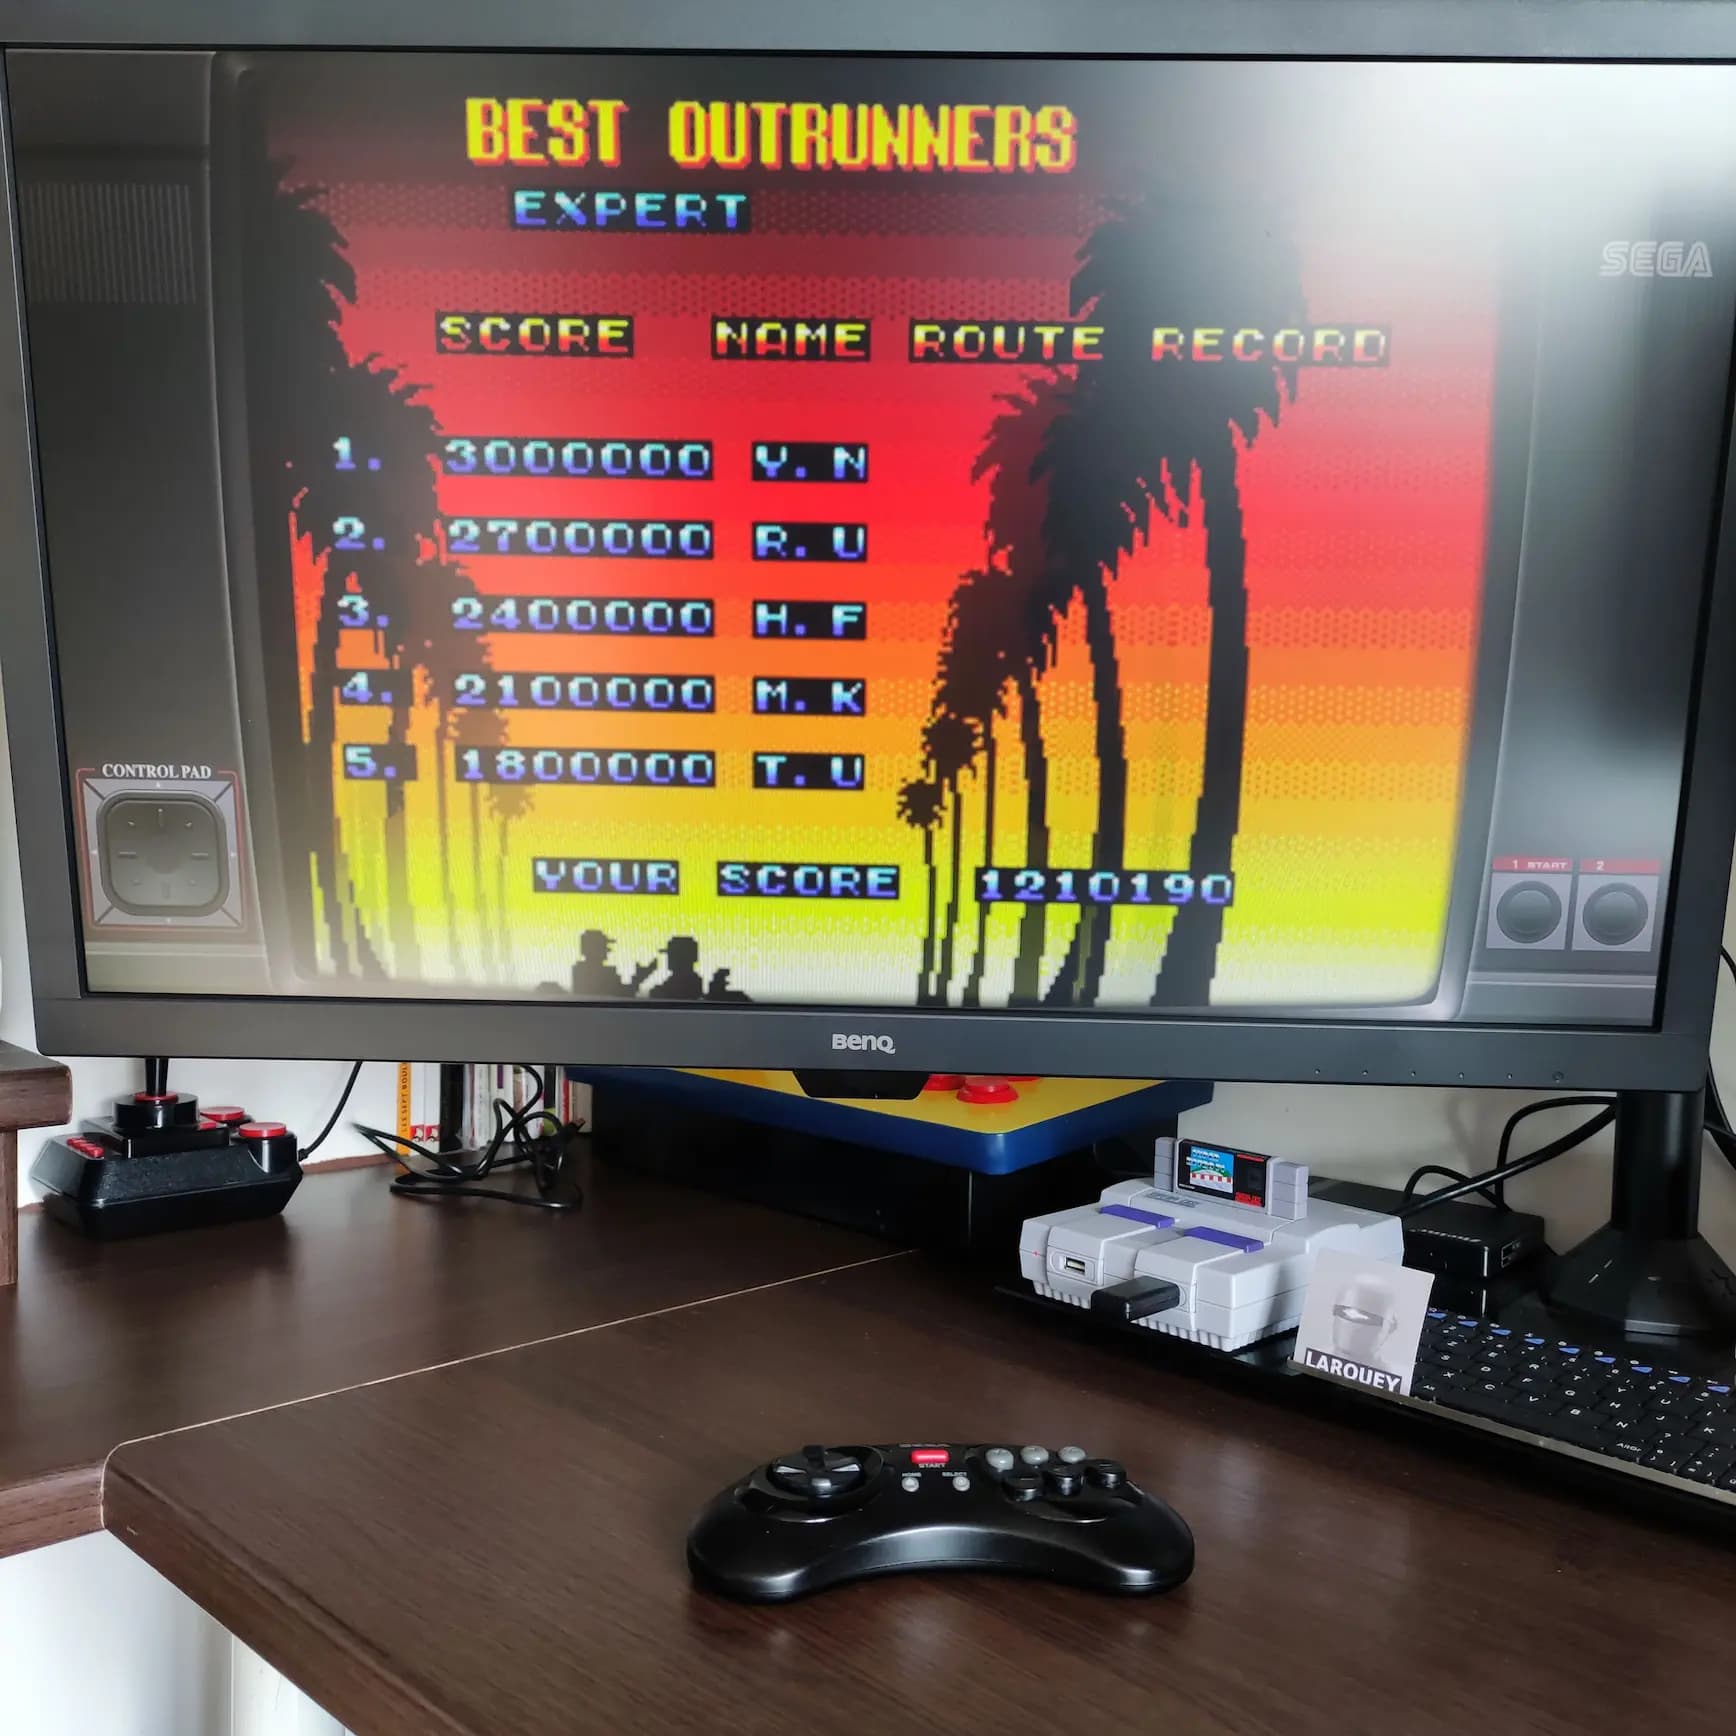 Larquey: OutRun 3D [Expert] (Sega Master System Emulated) 1,210,190 points on 2022-07-30 01:24:57